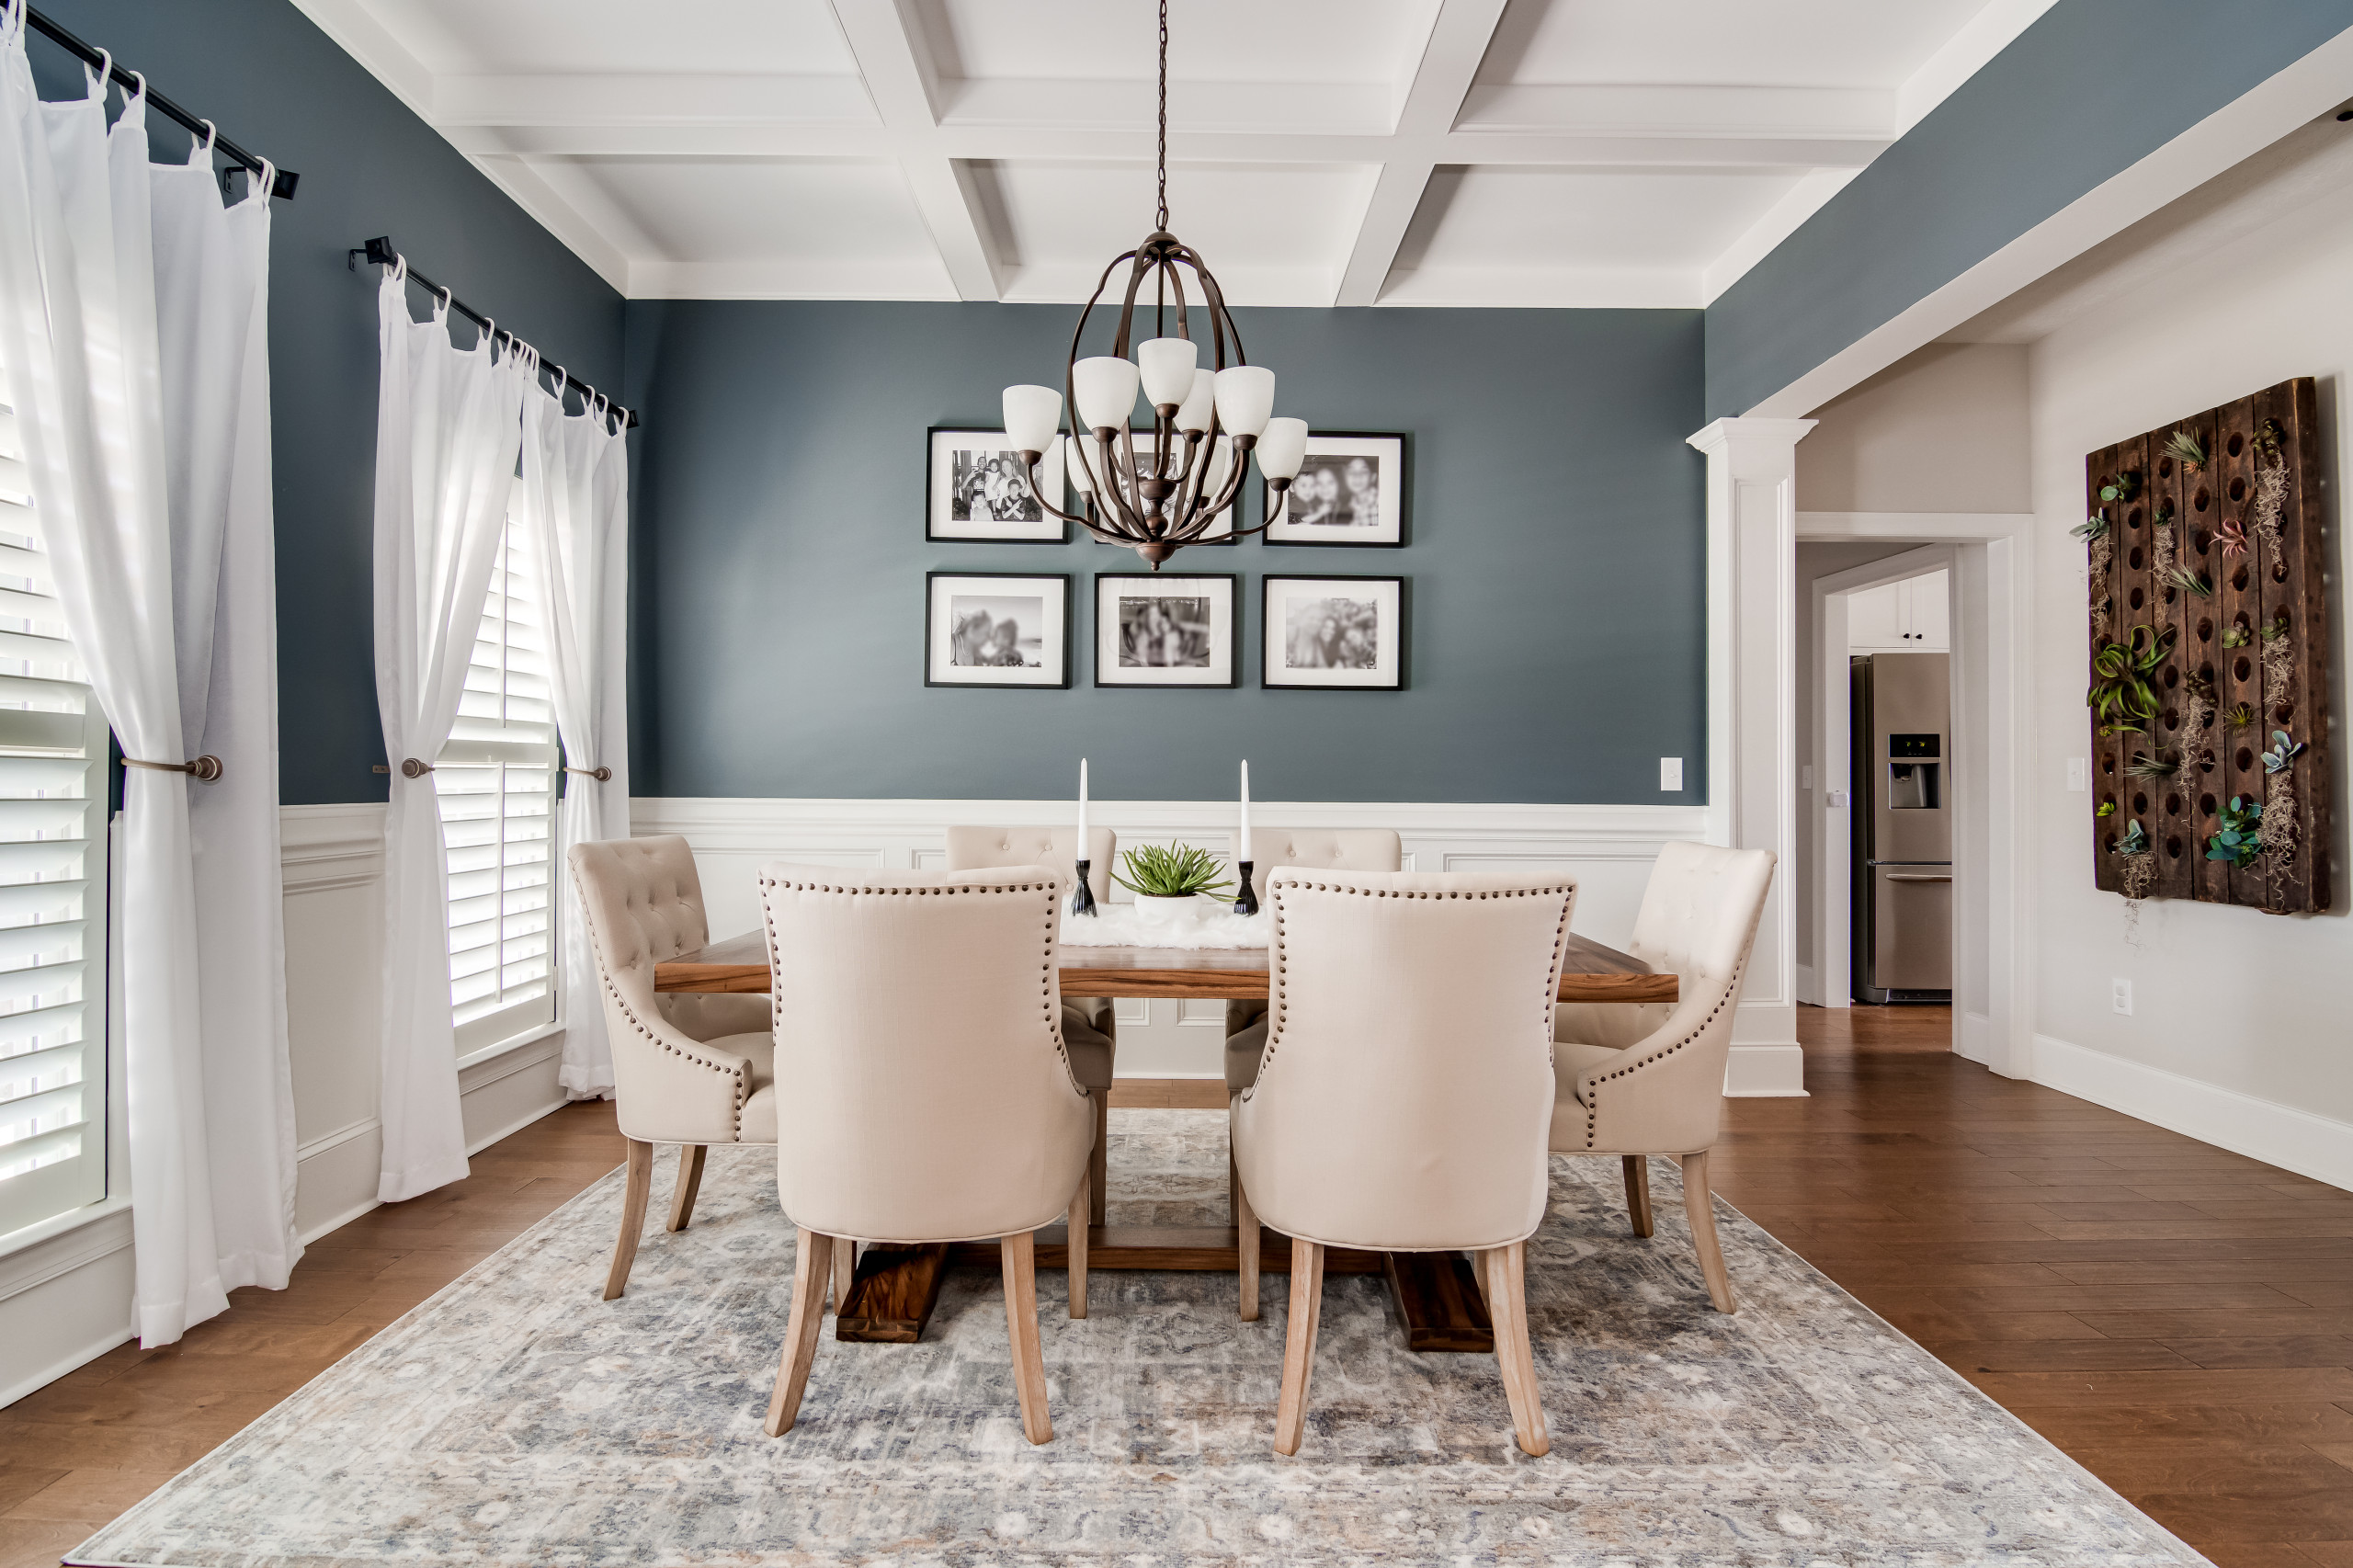 Farmhouse dining room with a warm/cool balanced palette incorporating hygge and comfort into a more formal space.